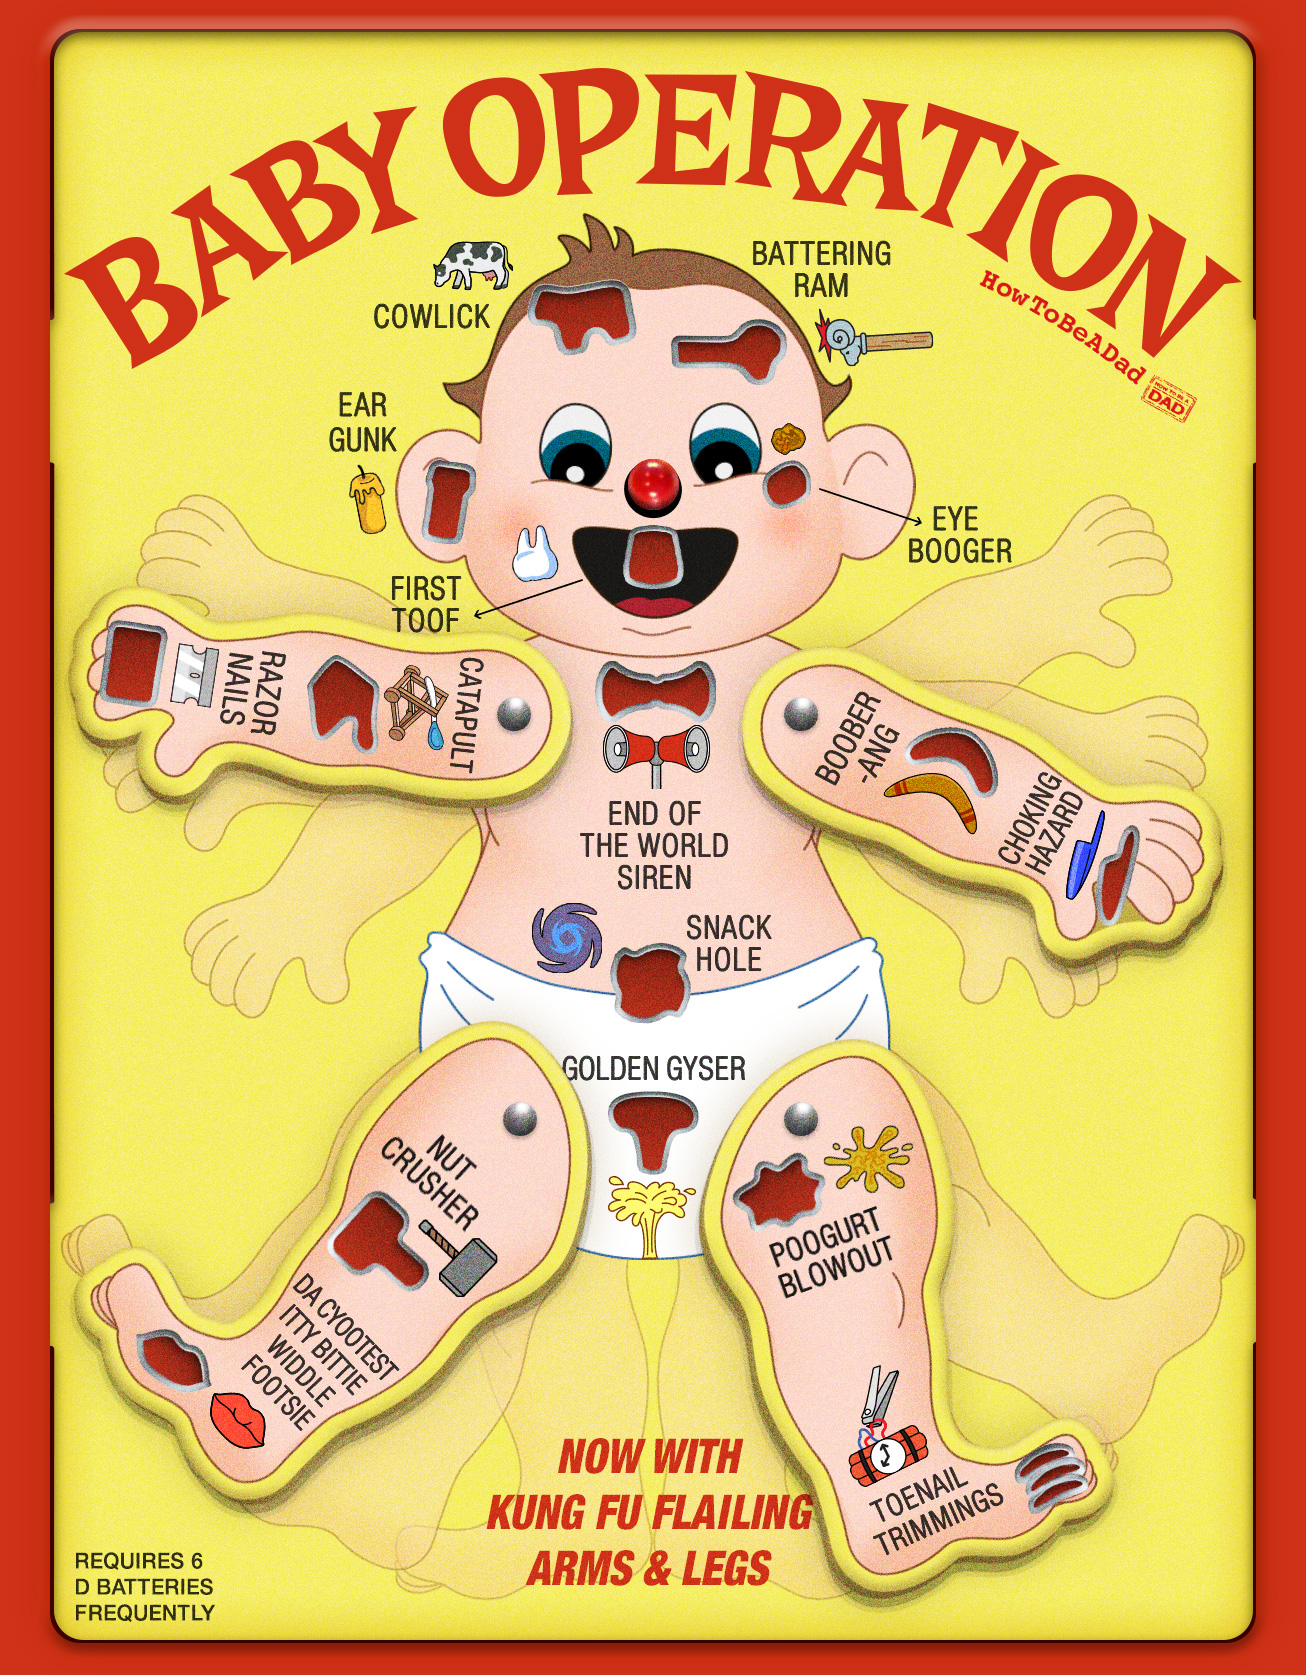 Baby Operation, AnxietyFueled Fun for the Whole Family!